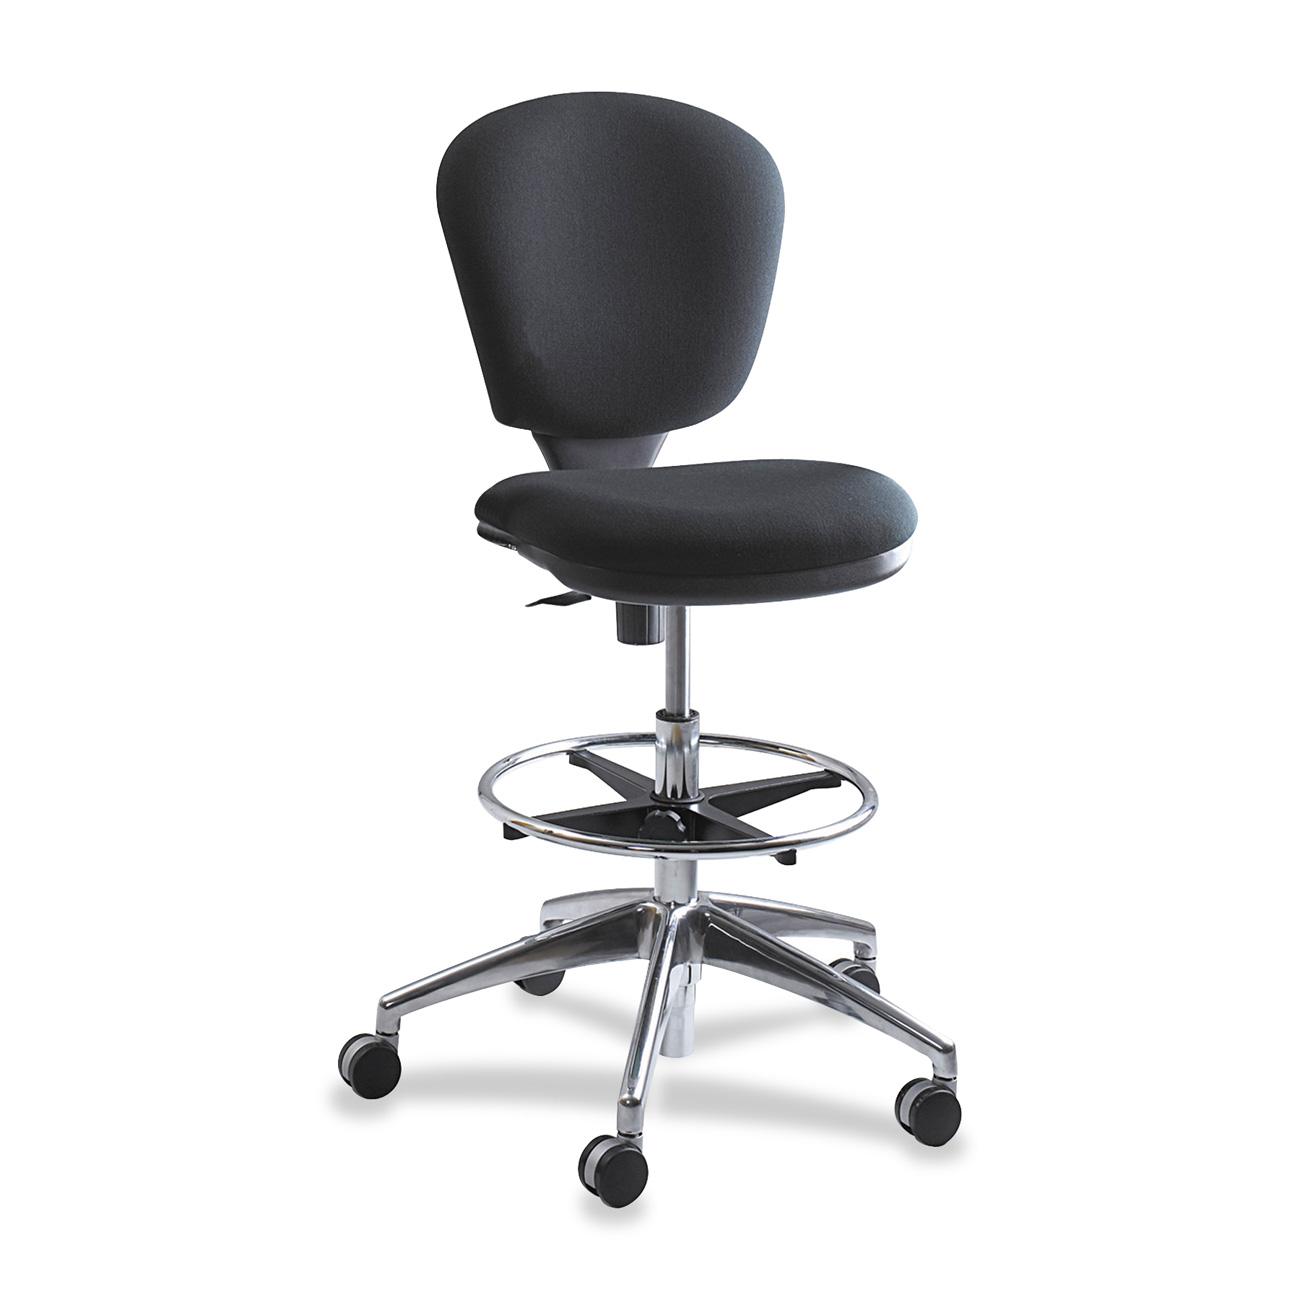 Safco Metro Extended Height Chair - Black Acrylic Seat - 5-star Base - 1 Each